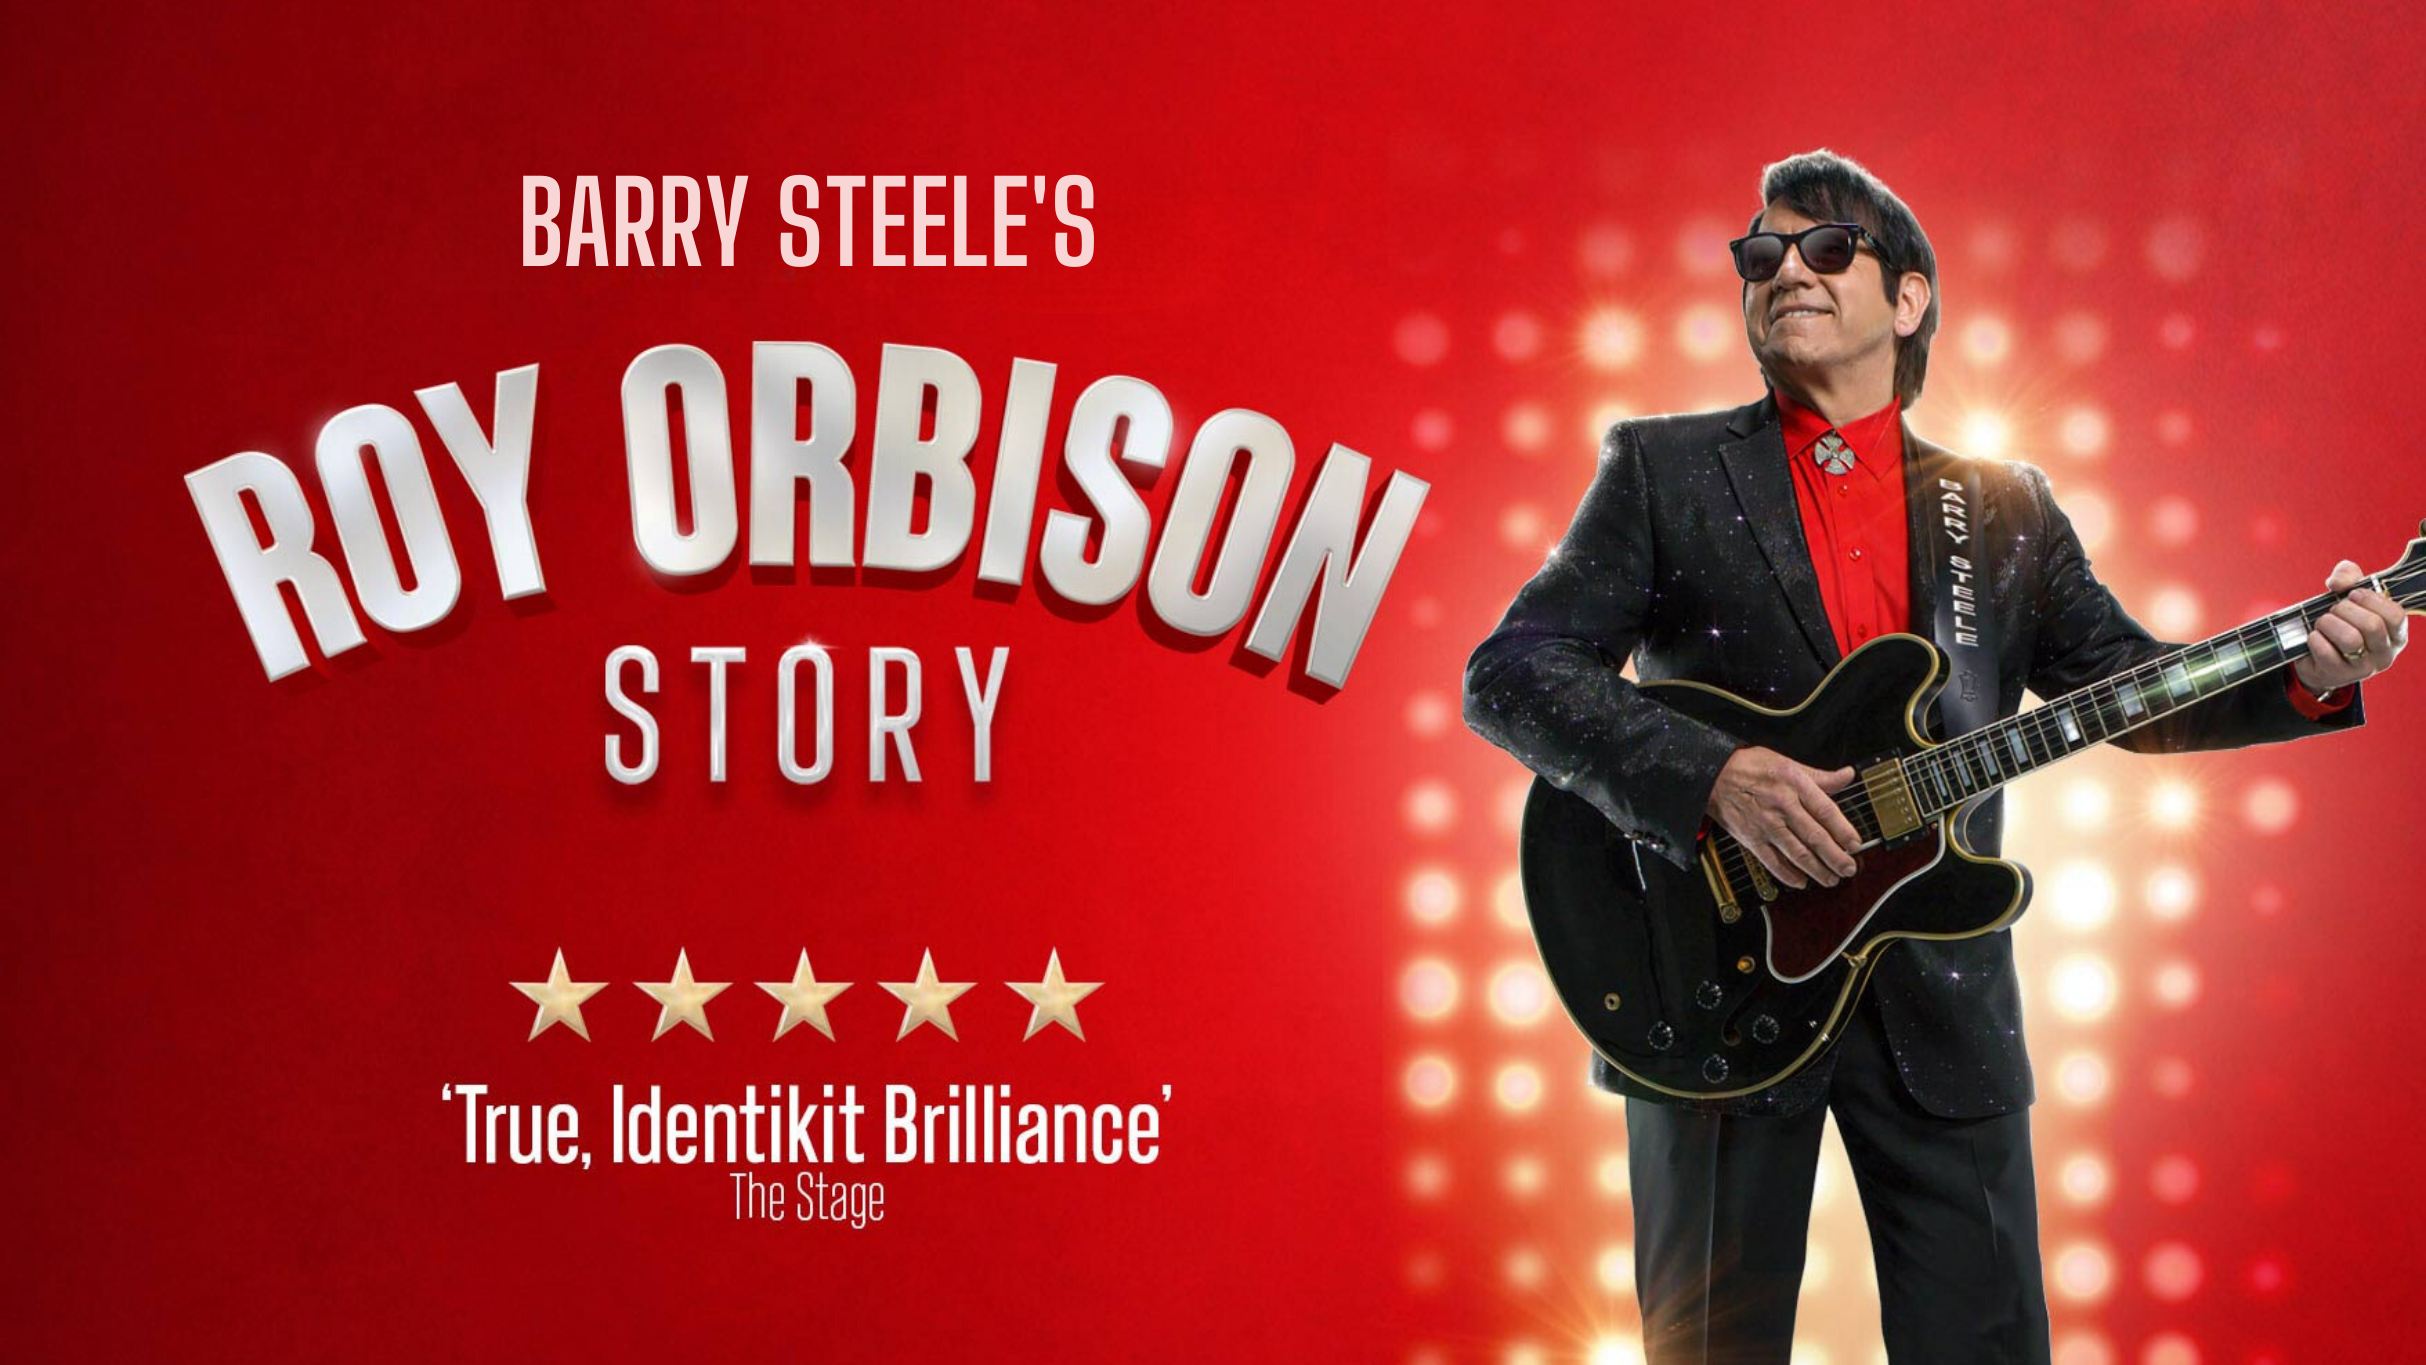 Roy Orbison Story, the